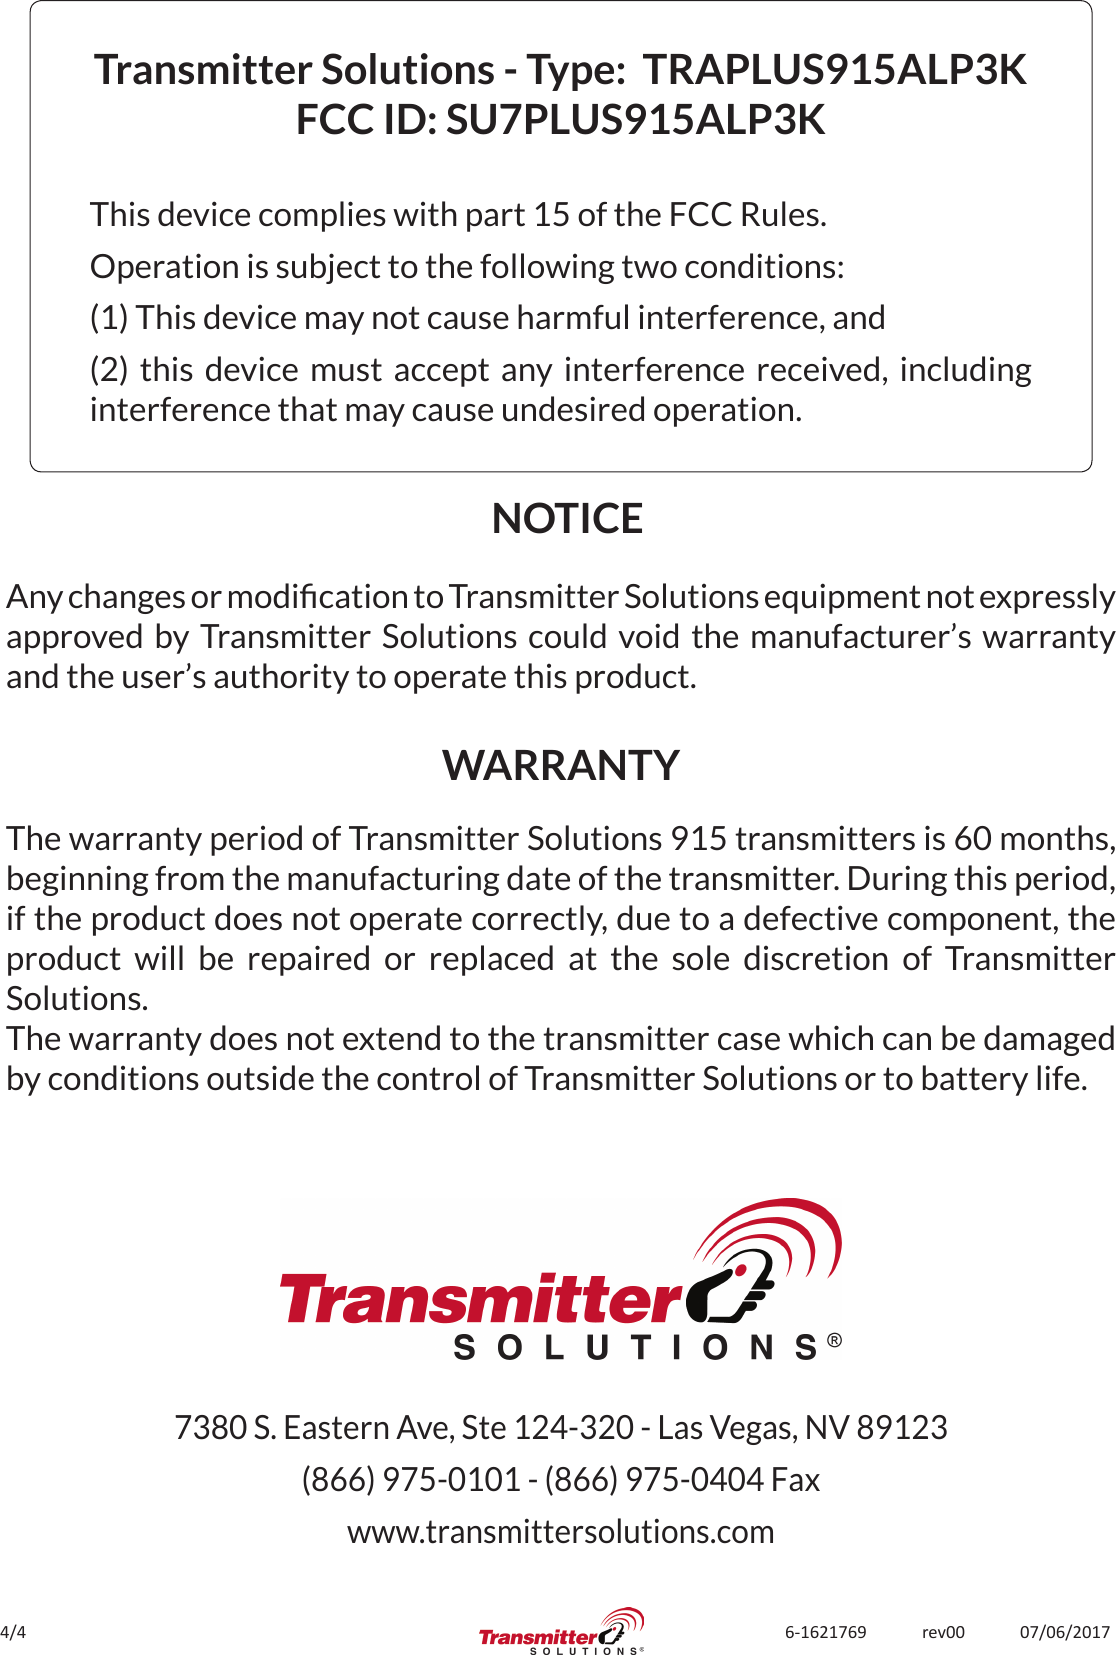 4/4 6-1621769             rev00             07/06/2017Transmitter Solutions - Type:  TRAPLUS915ALP3KFCC ID: SU7PLUS915ALP3K This device complies with part 15 of the FCC Rules.Operation is subject to the following two conditions:(1) This device may not cause harmful interference, and(2) this device must accept any interference received, including interference that may cause undesired operation.The warranty period of Transmitter Solutions 915 transmitters is 60 months, beginning from the manufacturing date of the transmitter. During this period, if the product does not operate correctly, due to a defective component, the product will be repaired or replaced at the sole discretion of Transmitter Solutions. The warranty does not extend to the transmitter case which can be damaged by conditions outside the control of Transmitter Solutions or to battery life.NOTICEWARRANTYAny changes or modication to Transmitter Solutions equipment not expressly approved by Transmitter Solutions could void the manufacturer’s warranty and the user’s authority to operate this product.7380 S. Eastern Ave, Ste 124-320 - Las Vegas, NV 89123(866) 975-0101 - (866) 975-0404 Faxwww.transmittersolutions.com